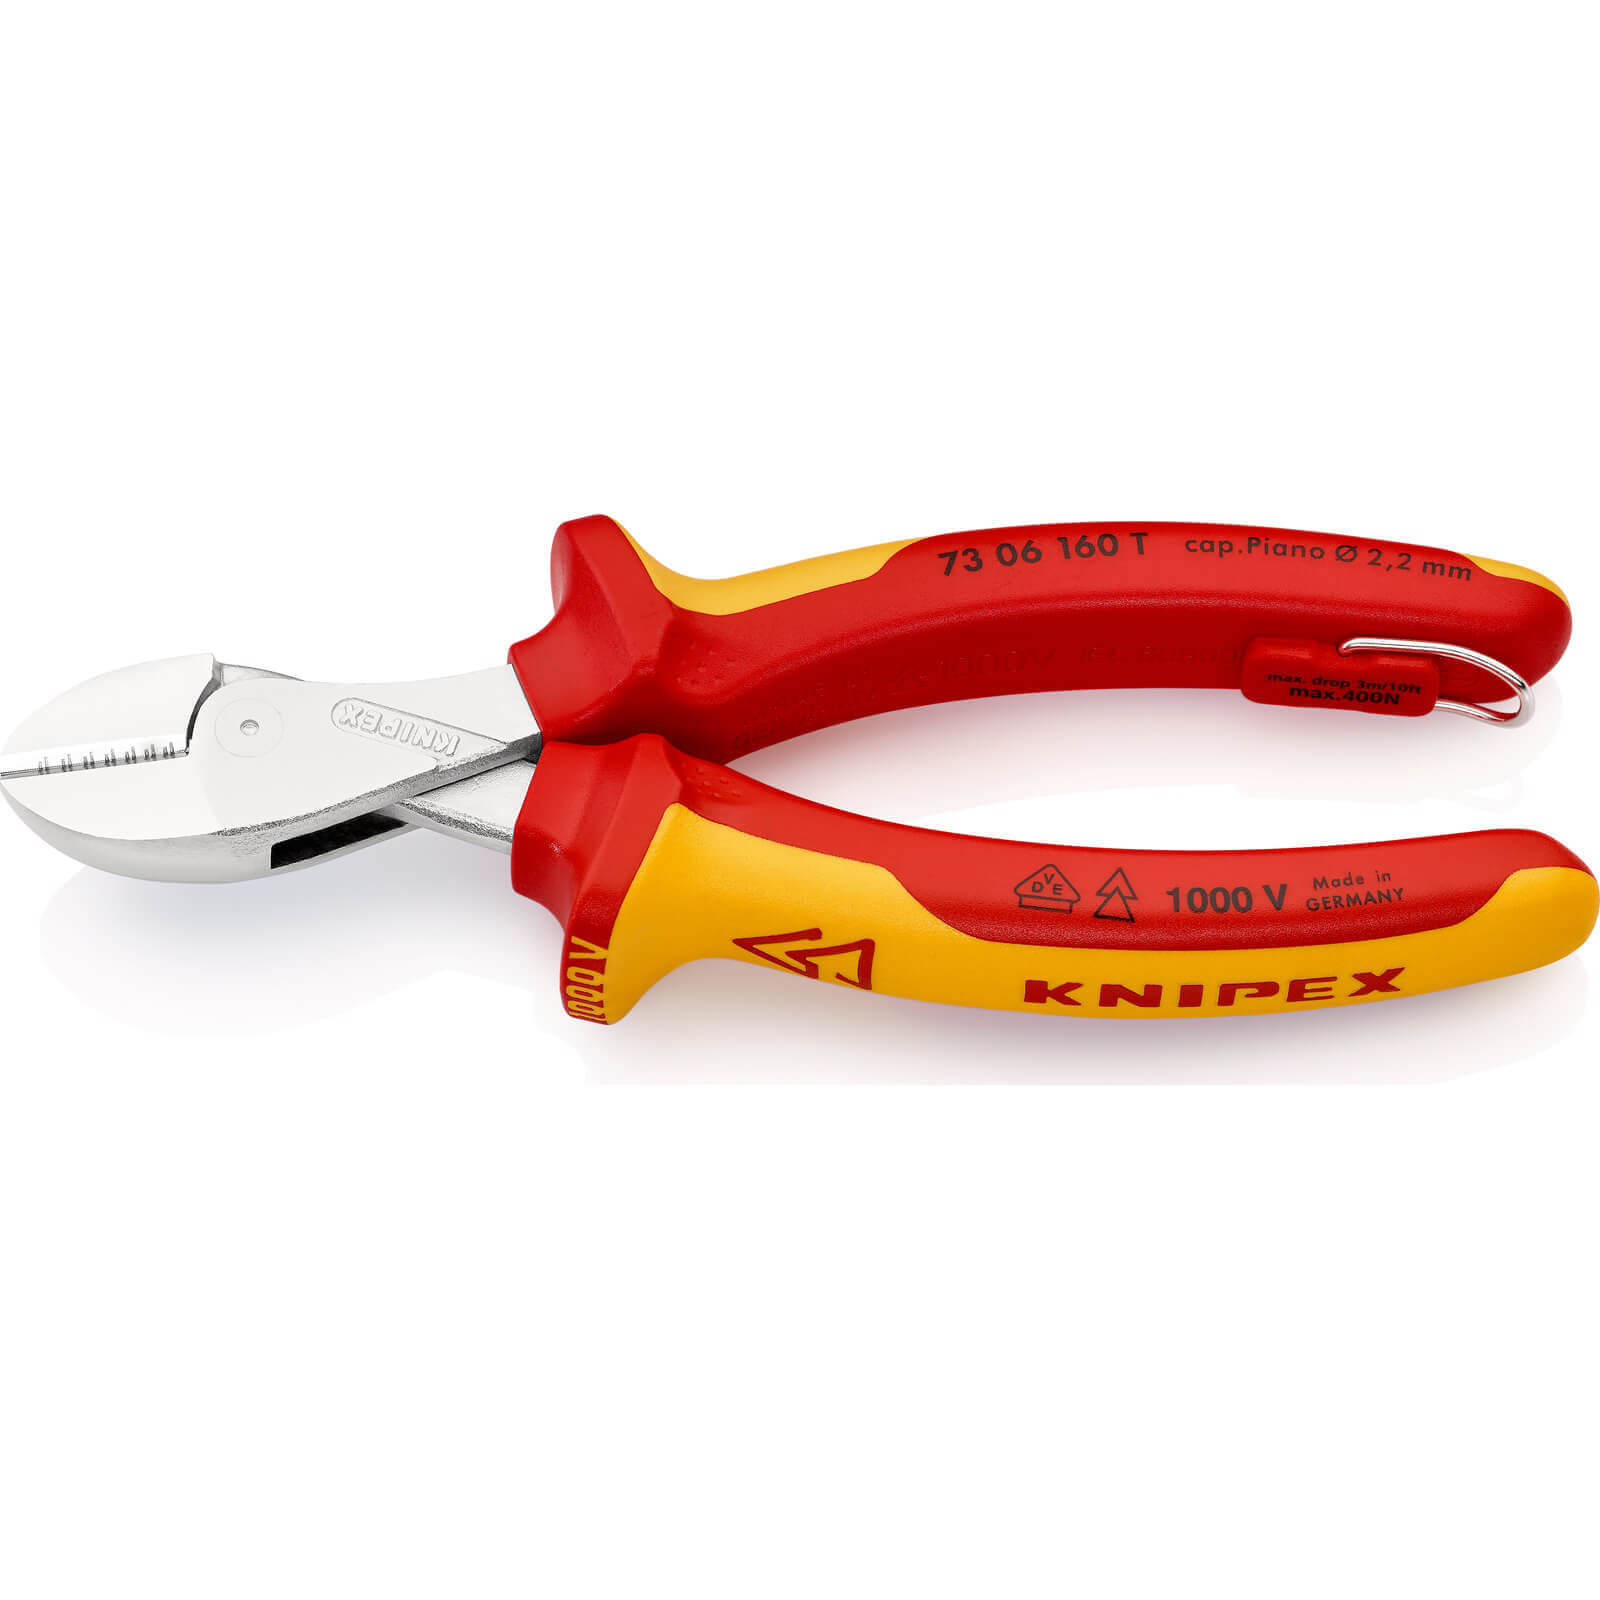 Photo of Knipex 73 06 Vde Insulated X Cut Compact Tethered Diagonal Cutting Pliers 160mm